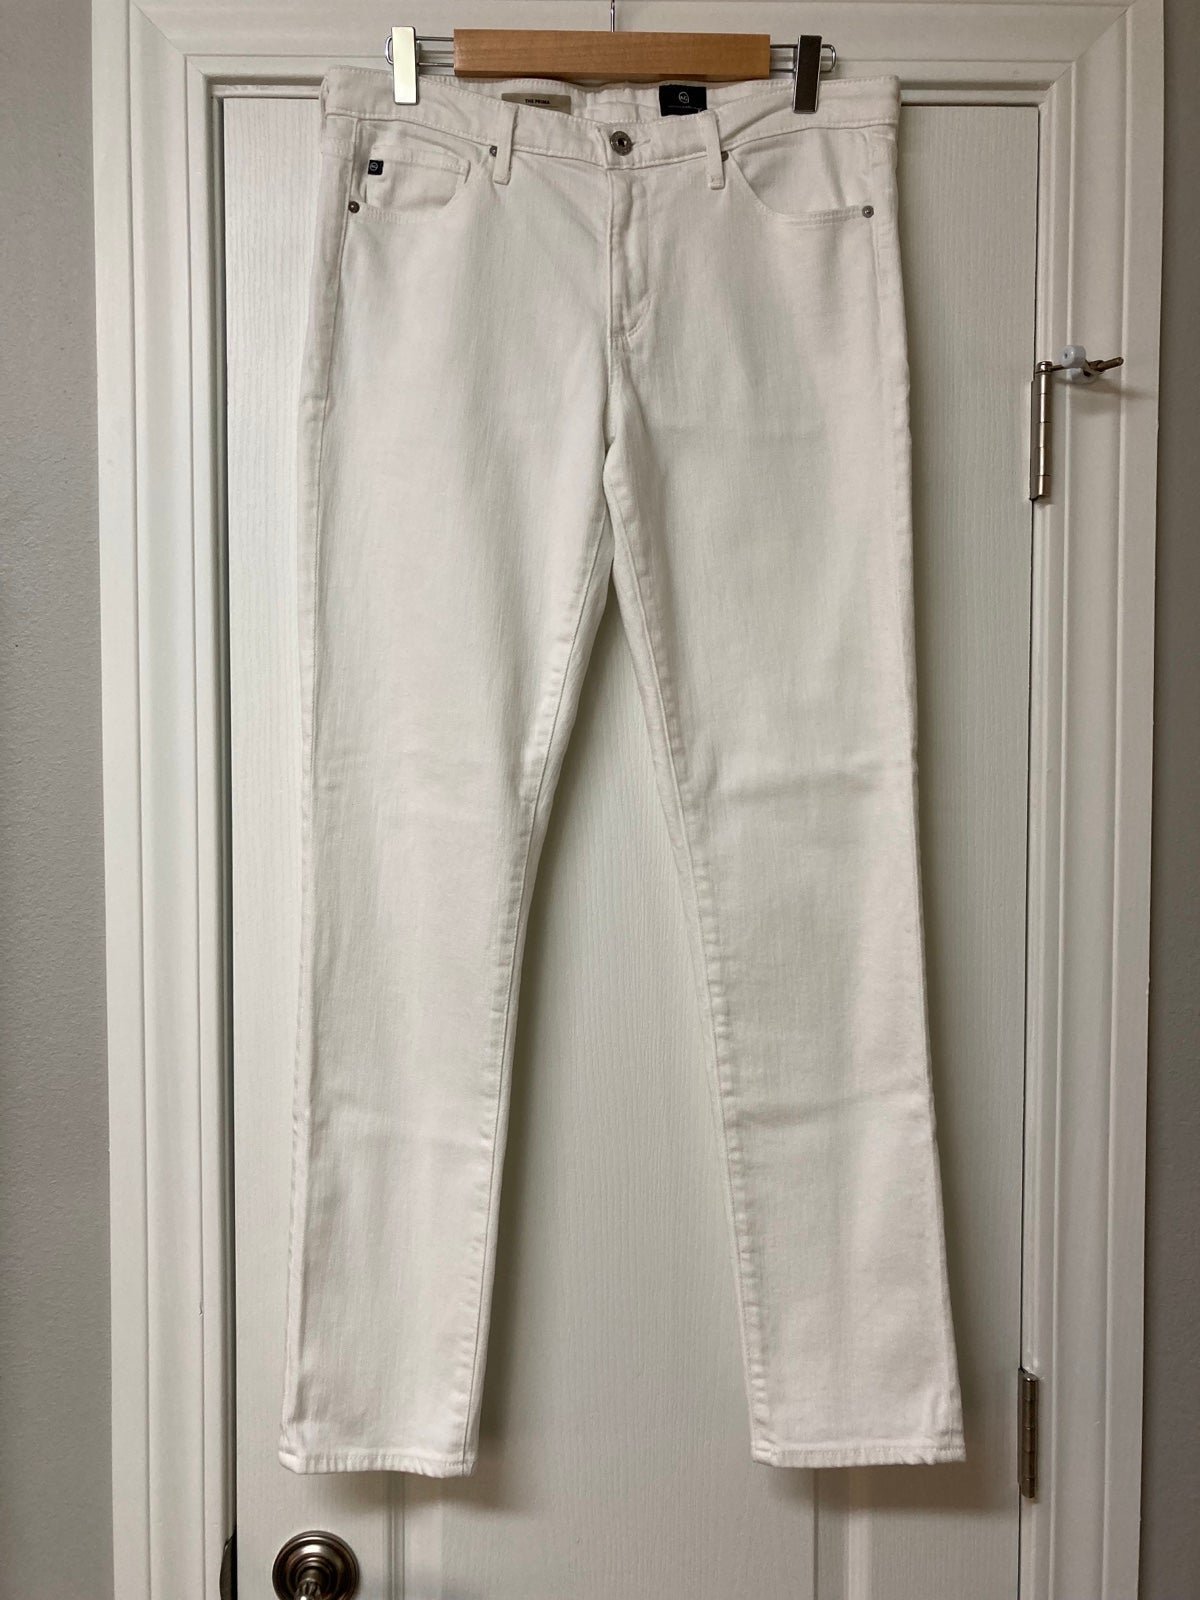 large selection AG Prima Skinny Cut White Jeans size 31